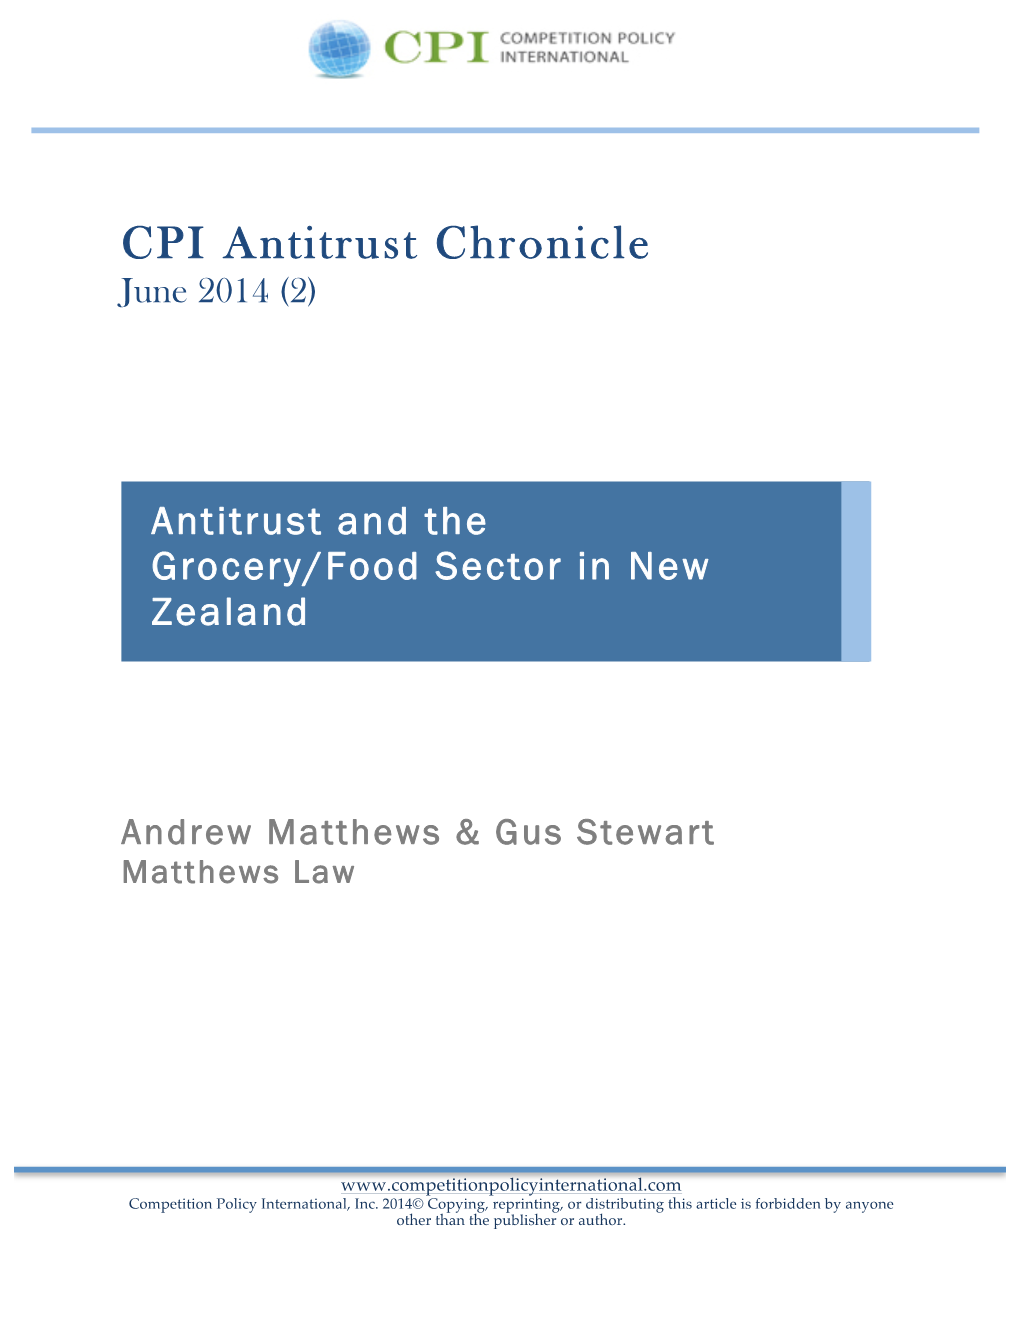 CPI Antitrust Chronicle – Antitrust and the Grocery Sector in New Zealand